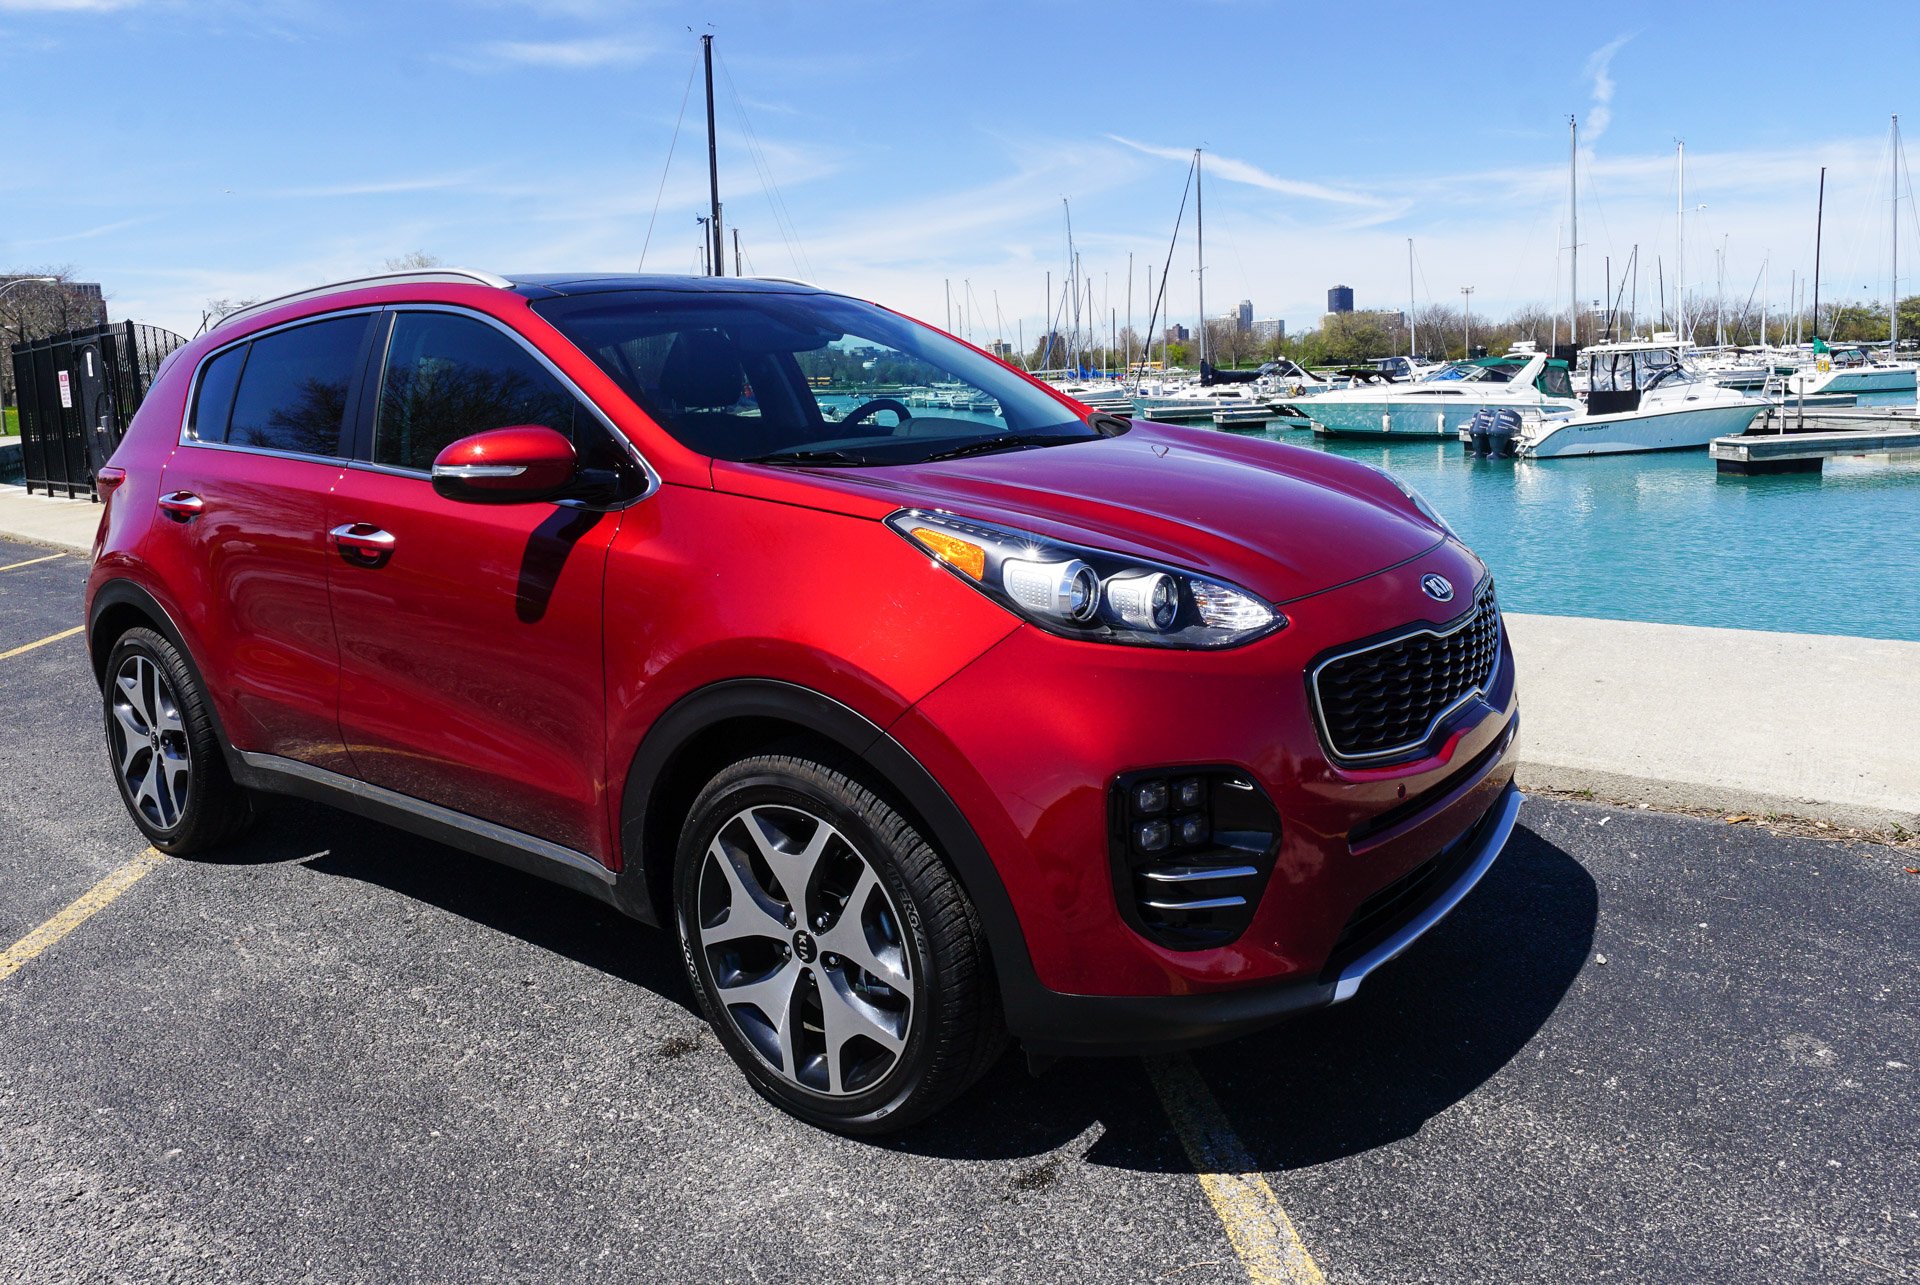 The Sportage I drove came in the front-wheel drive configuration ...